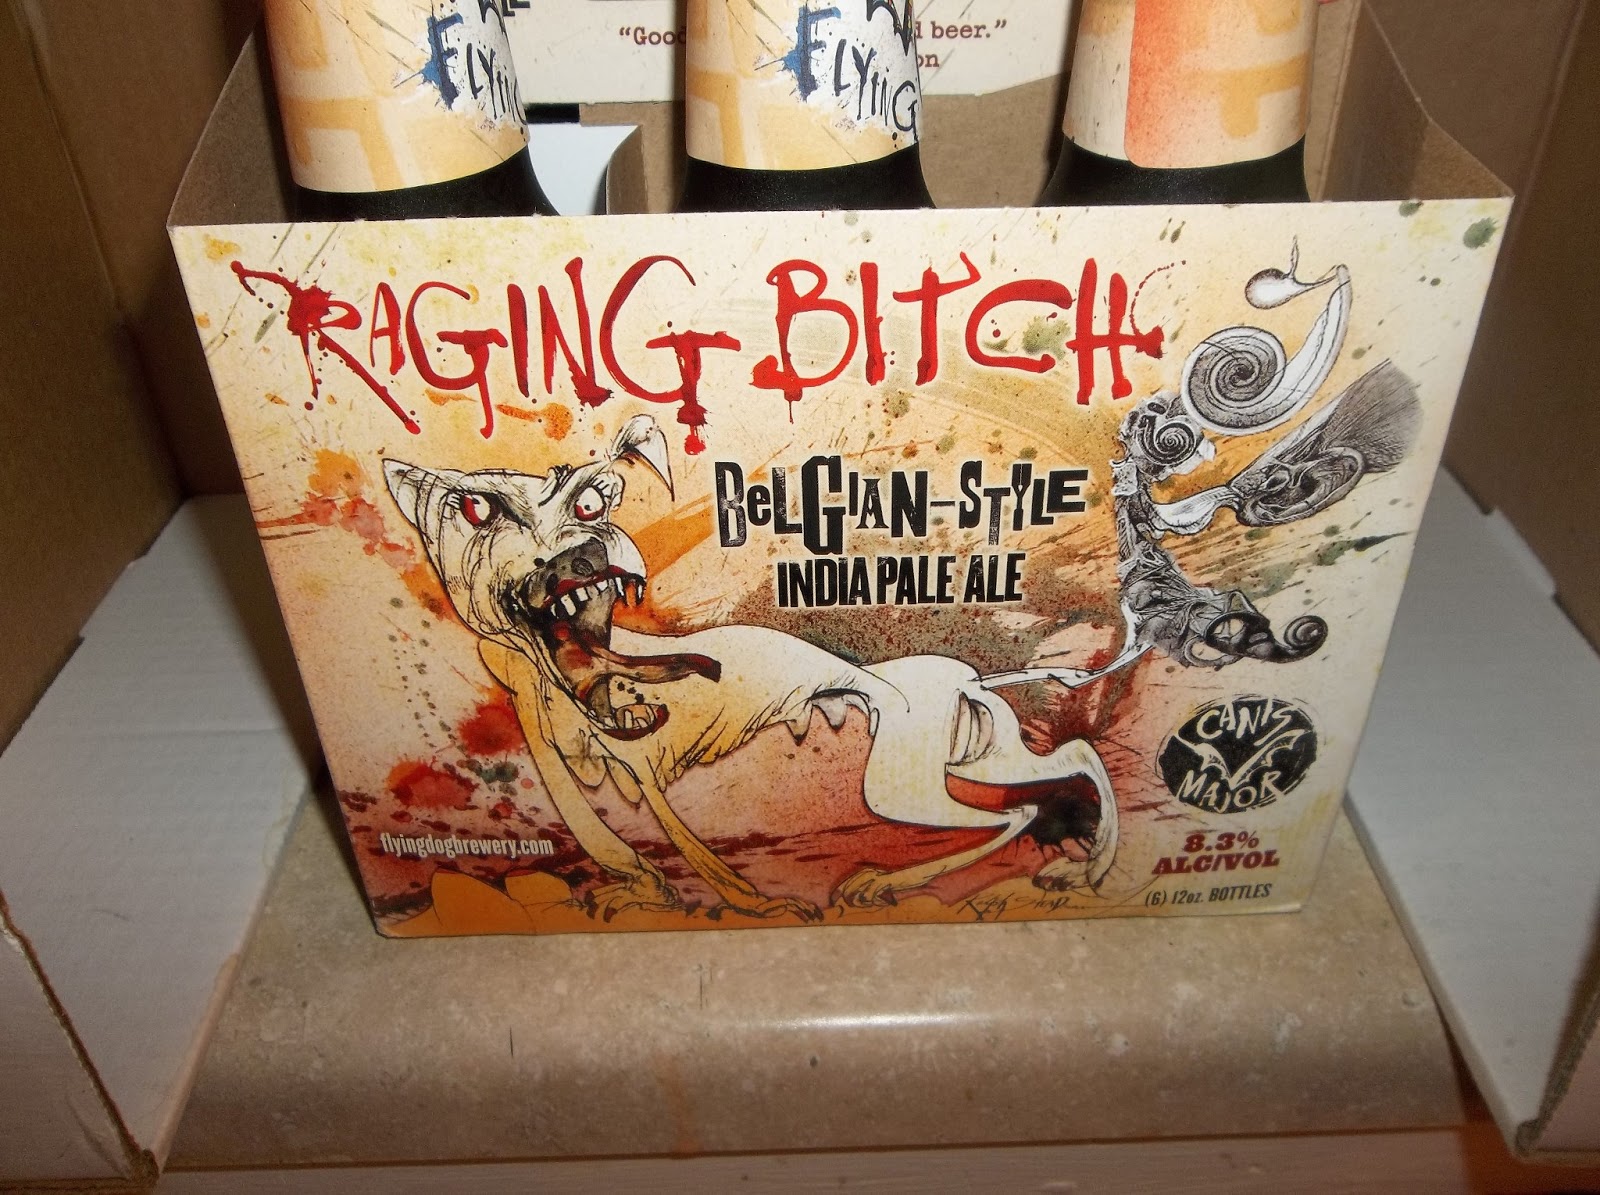 Old Bay beer, Flying Dog Brewerys Dead Rise, is back 